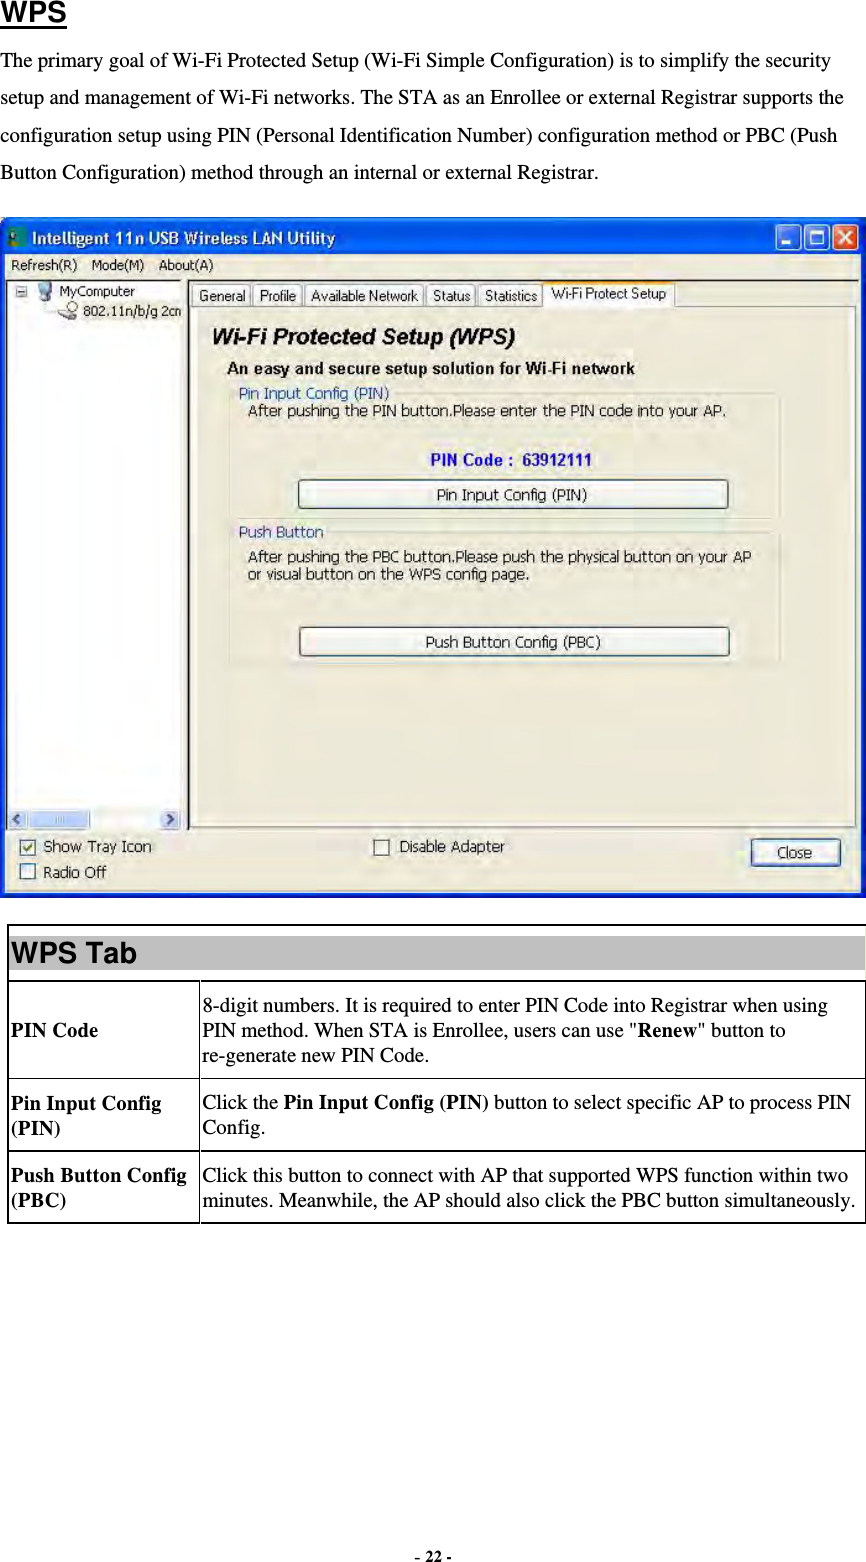  - 22 - WPS The primary goal of Wi-Fi Protected Setup (Wi-Fi Simple Configuration) is to simplify the security setup and management of Wi-Fi networks. The STA as an Enrollee or external Registrar supports the configuration setup using PIN (Personal Identification Number) configuration method or PBC (Push Button Configuration) method through an internal or external Registrar.  WPS Tab PIN Code 8-digit numbers. It is required to enter PIN Code into Registrar when using PIN method. When STA is Enrollee, users can use &quot;Renew&quot; button to re-generate new PIN Code. Pin Input Config (PIN) Click the Pin Input Config (PIN) button to select specific AP to process PIN Config. Push Button Config (PBC) Click this button to connect with AP that supported WPS function within two minutes. Meanwhile, the AP should also click the PBC button simultaneously.  